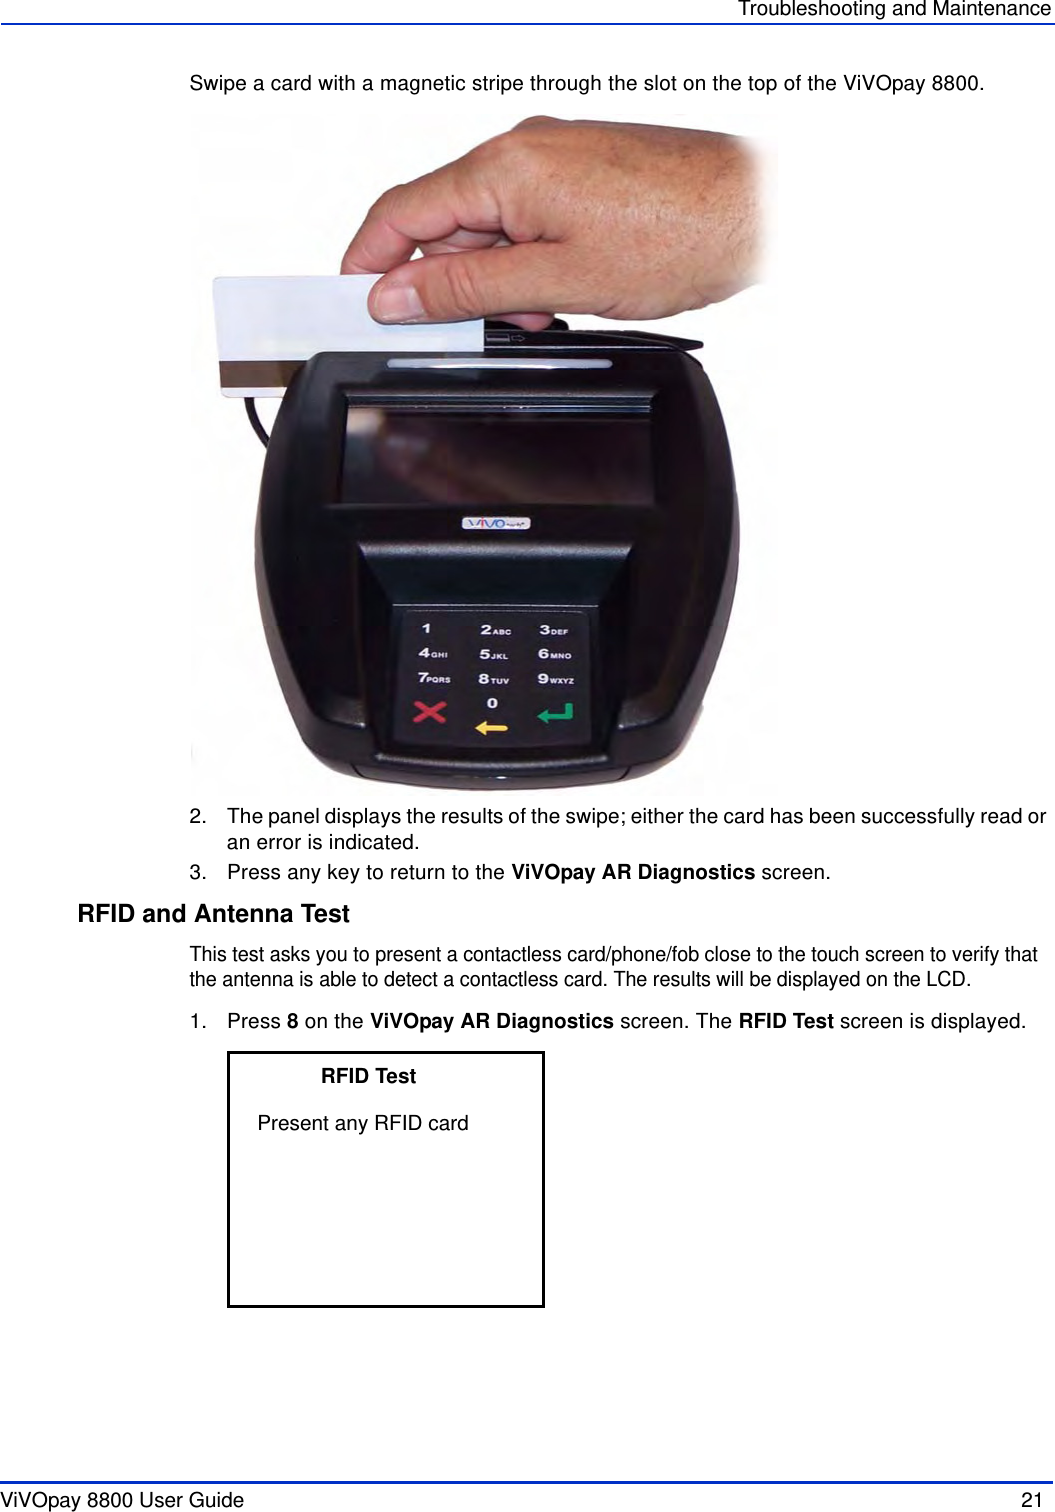 ViVOpay 8800 User Guide  21               Troubleshooting and MaintenanceSwipe a card with a magnetic stripe through the slot on the top of the ViVOpay 8800. 2. The panel displays the results of the swipe; either the card has been successfully read or an error is indicated.3. Press any key to return to the ViVOpay AR Diagnostics screen.RFID and Antenna TestThis test asks you to present a contactless card/phone/fob close to the touch screen to verify that the antenna is able to detect a contactless card. The results will be displayed on the LCD. 1. Press 8 on the ViVOpay AR Diagnostics screen. The RFID Test screen is displayed.           RFID TestPresent any RFID card                                   